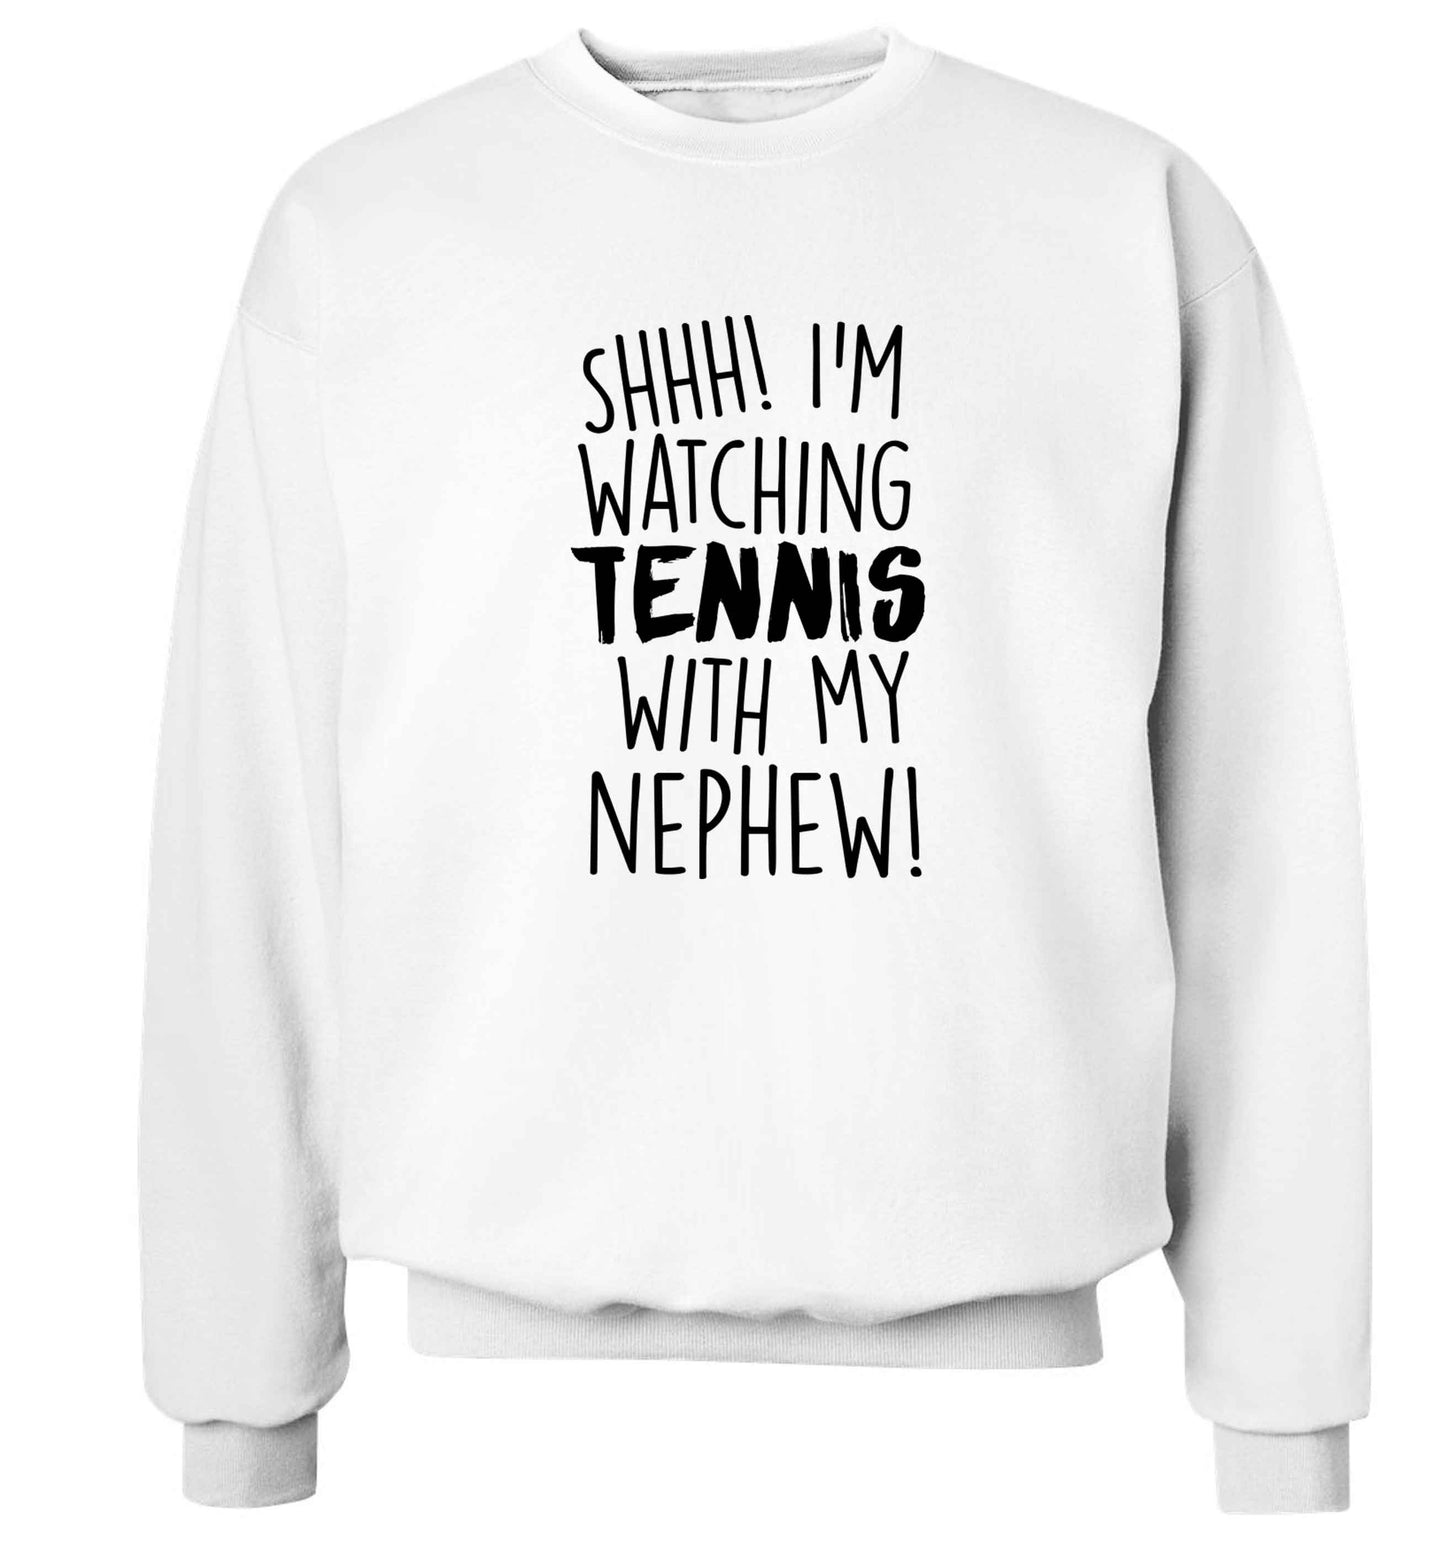 Shh! I'm watching tennis with my nephew! Adult's unisex white Sweater 2XL